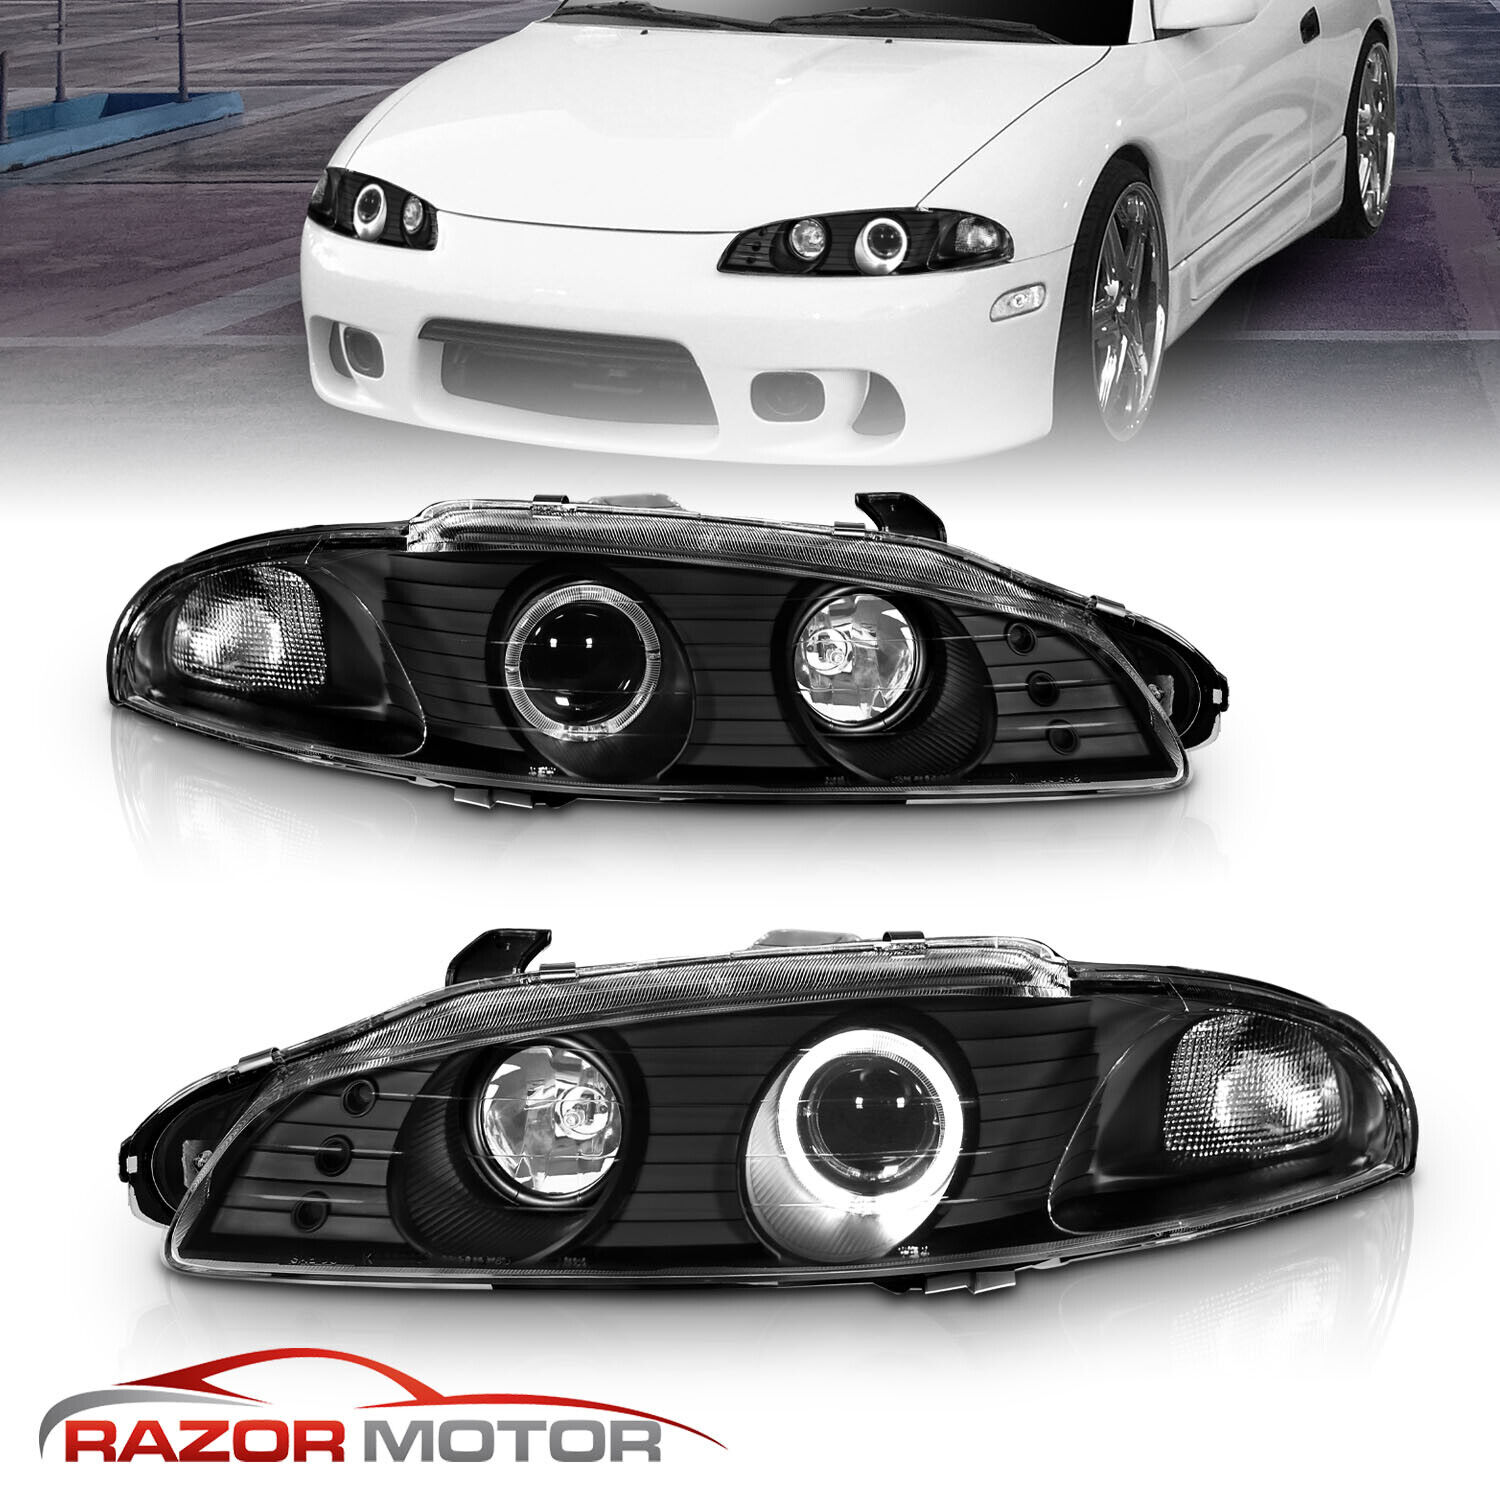 [LED Halo] 1997 1998 1999 Fit Mitsubishi Eclipse Black Projector Headlights Pair